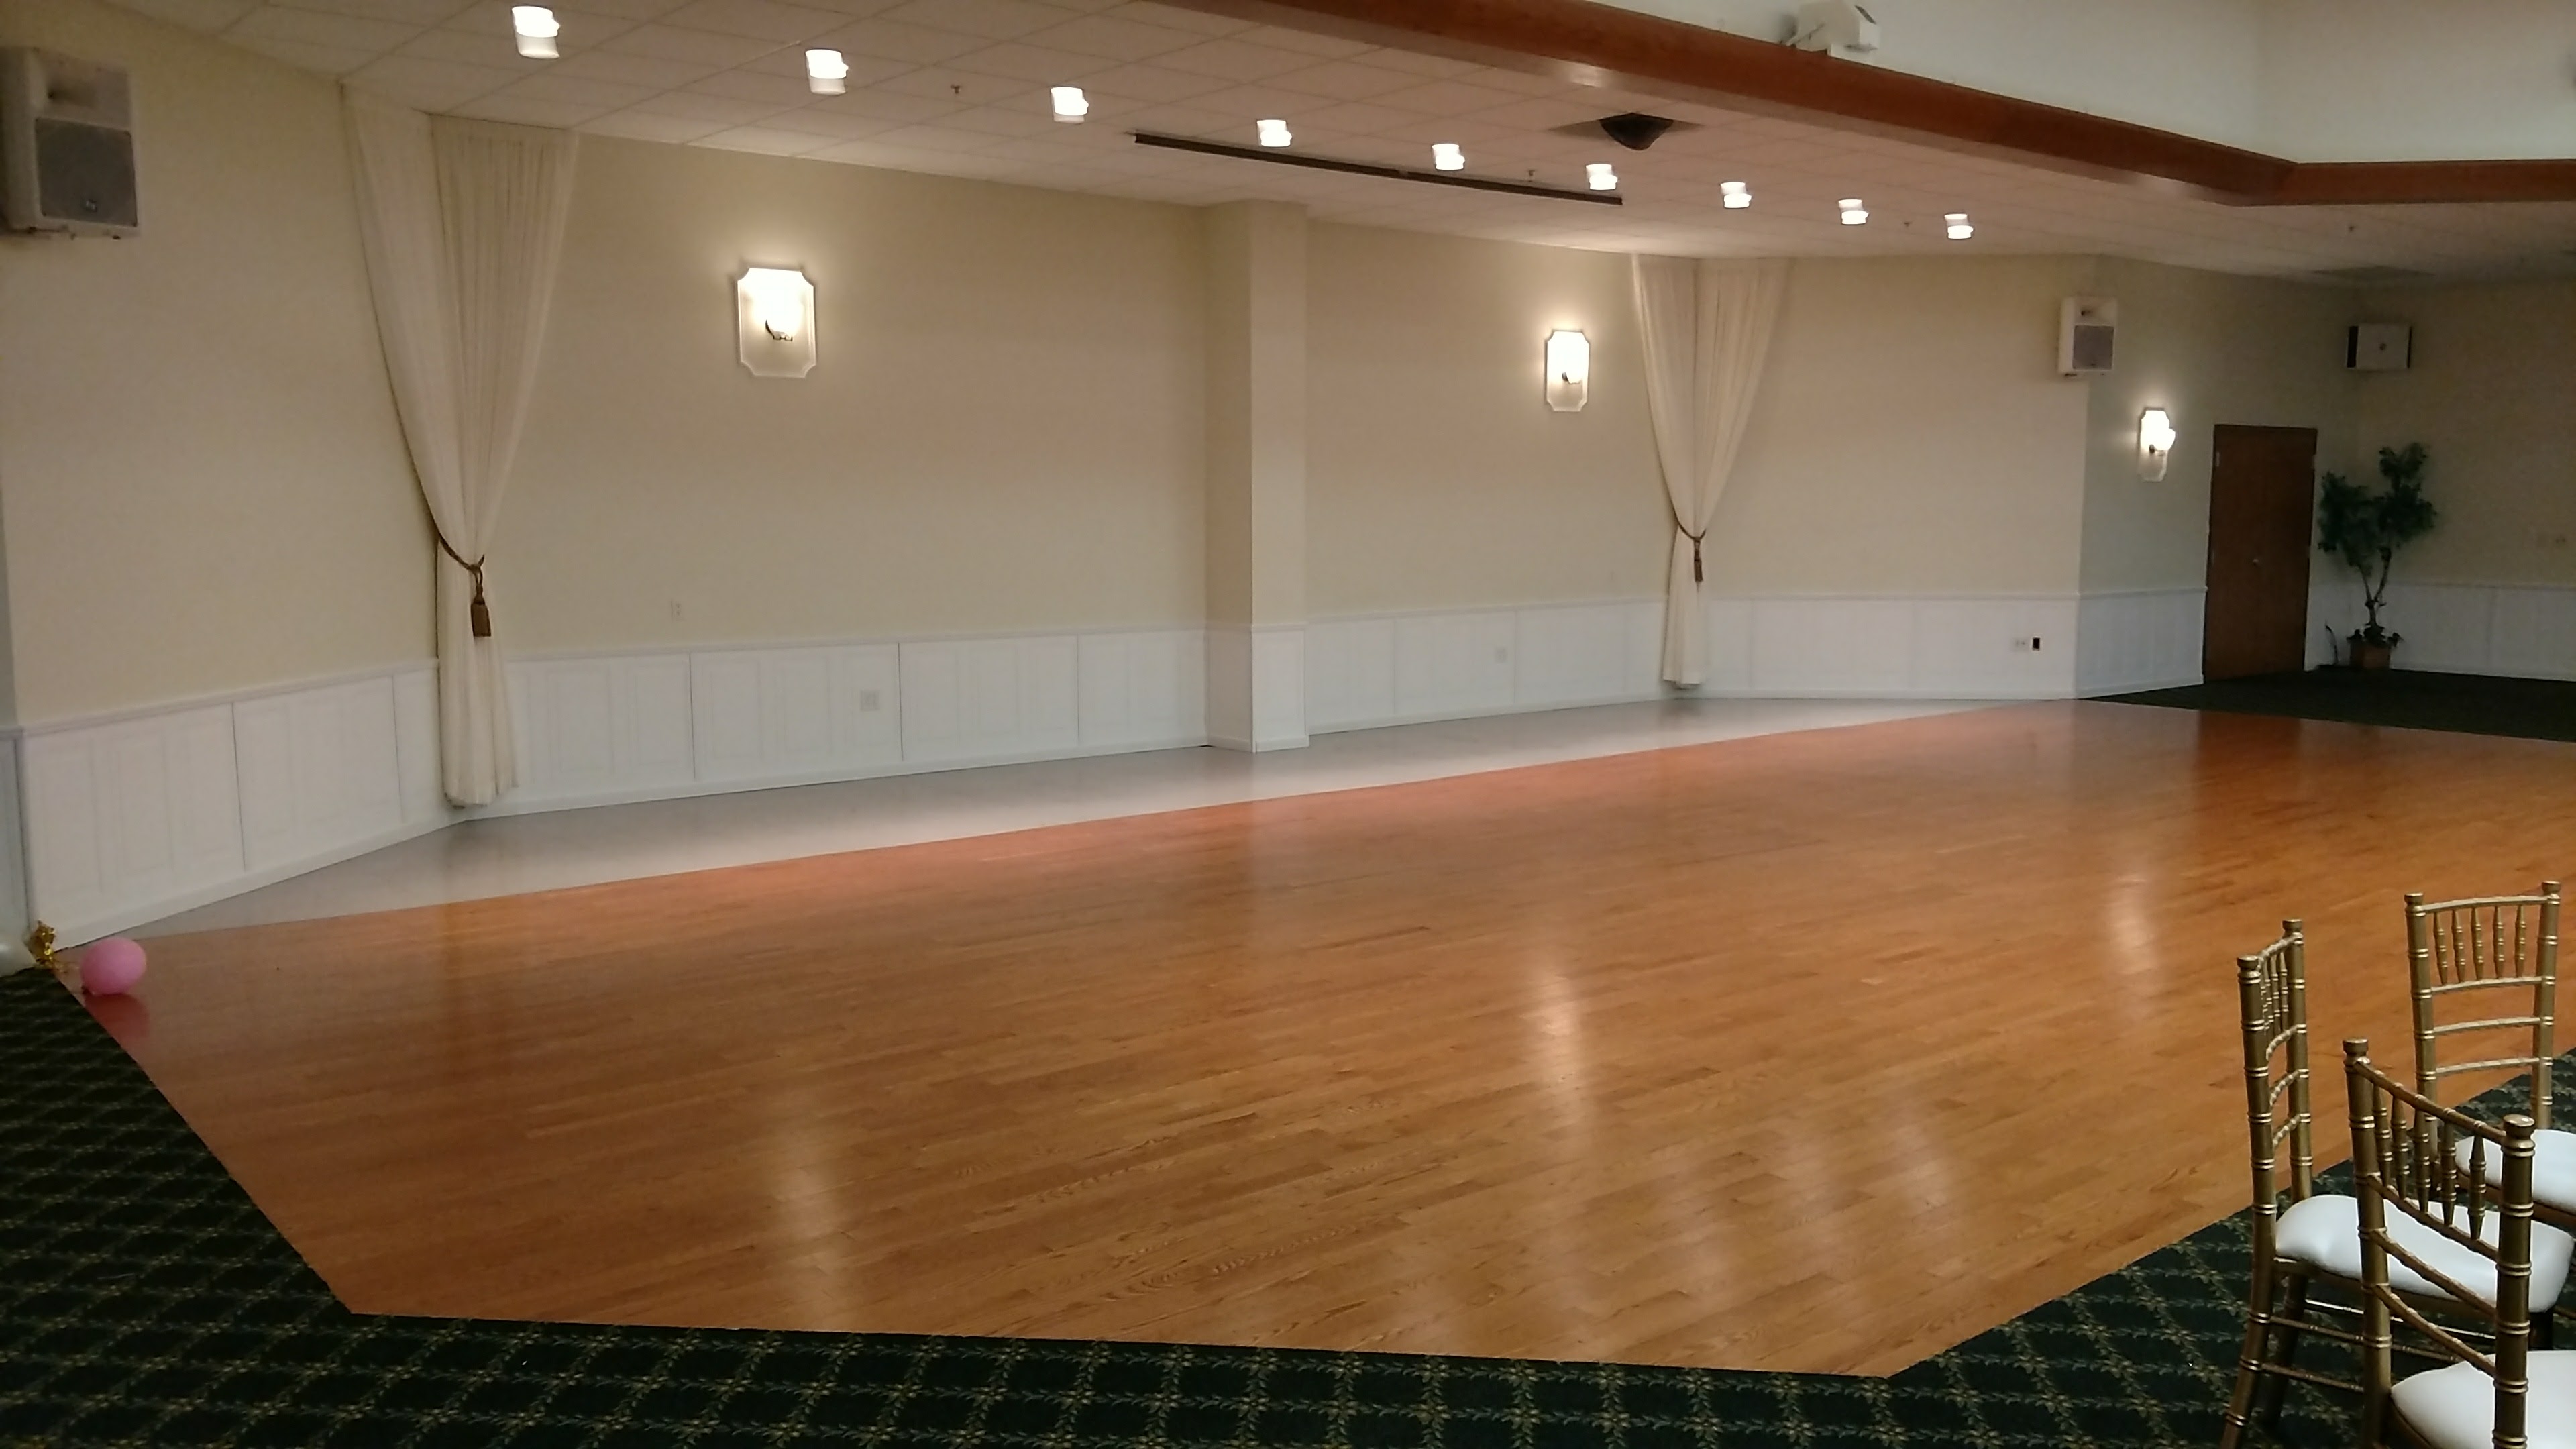 The Emerald Room at Sprinkler Fitters Local Union 692 Hall Rentals in Philadelphia, PA3840 x 2160